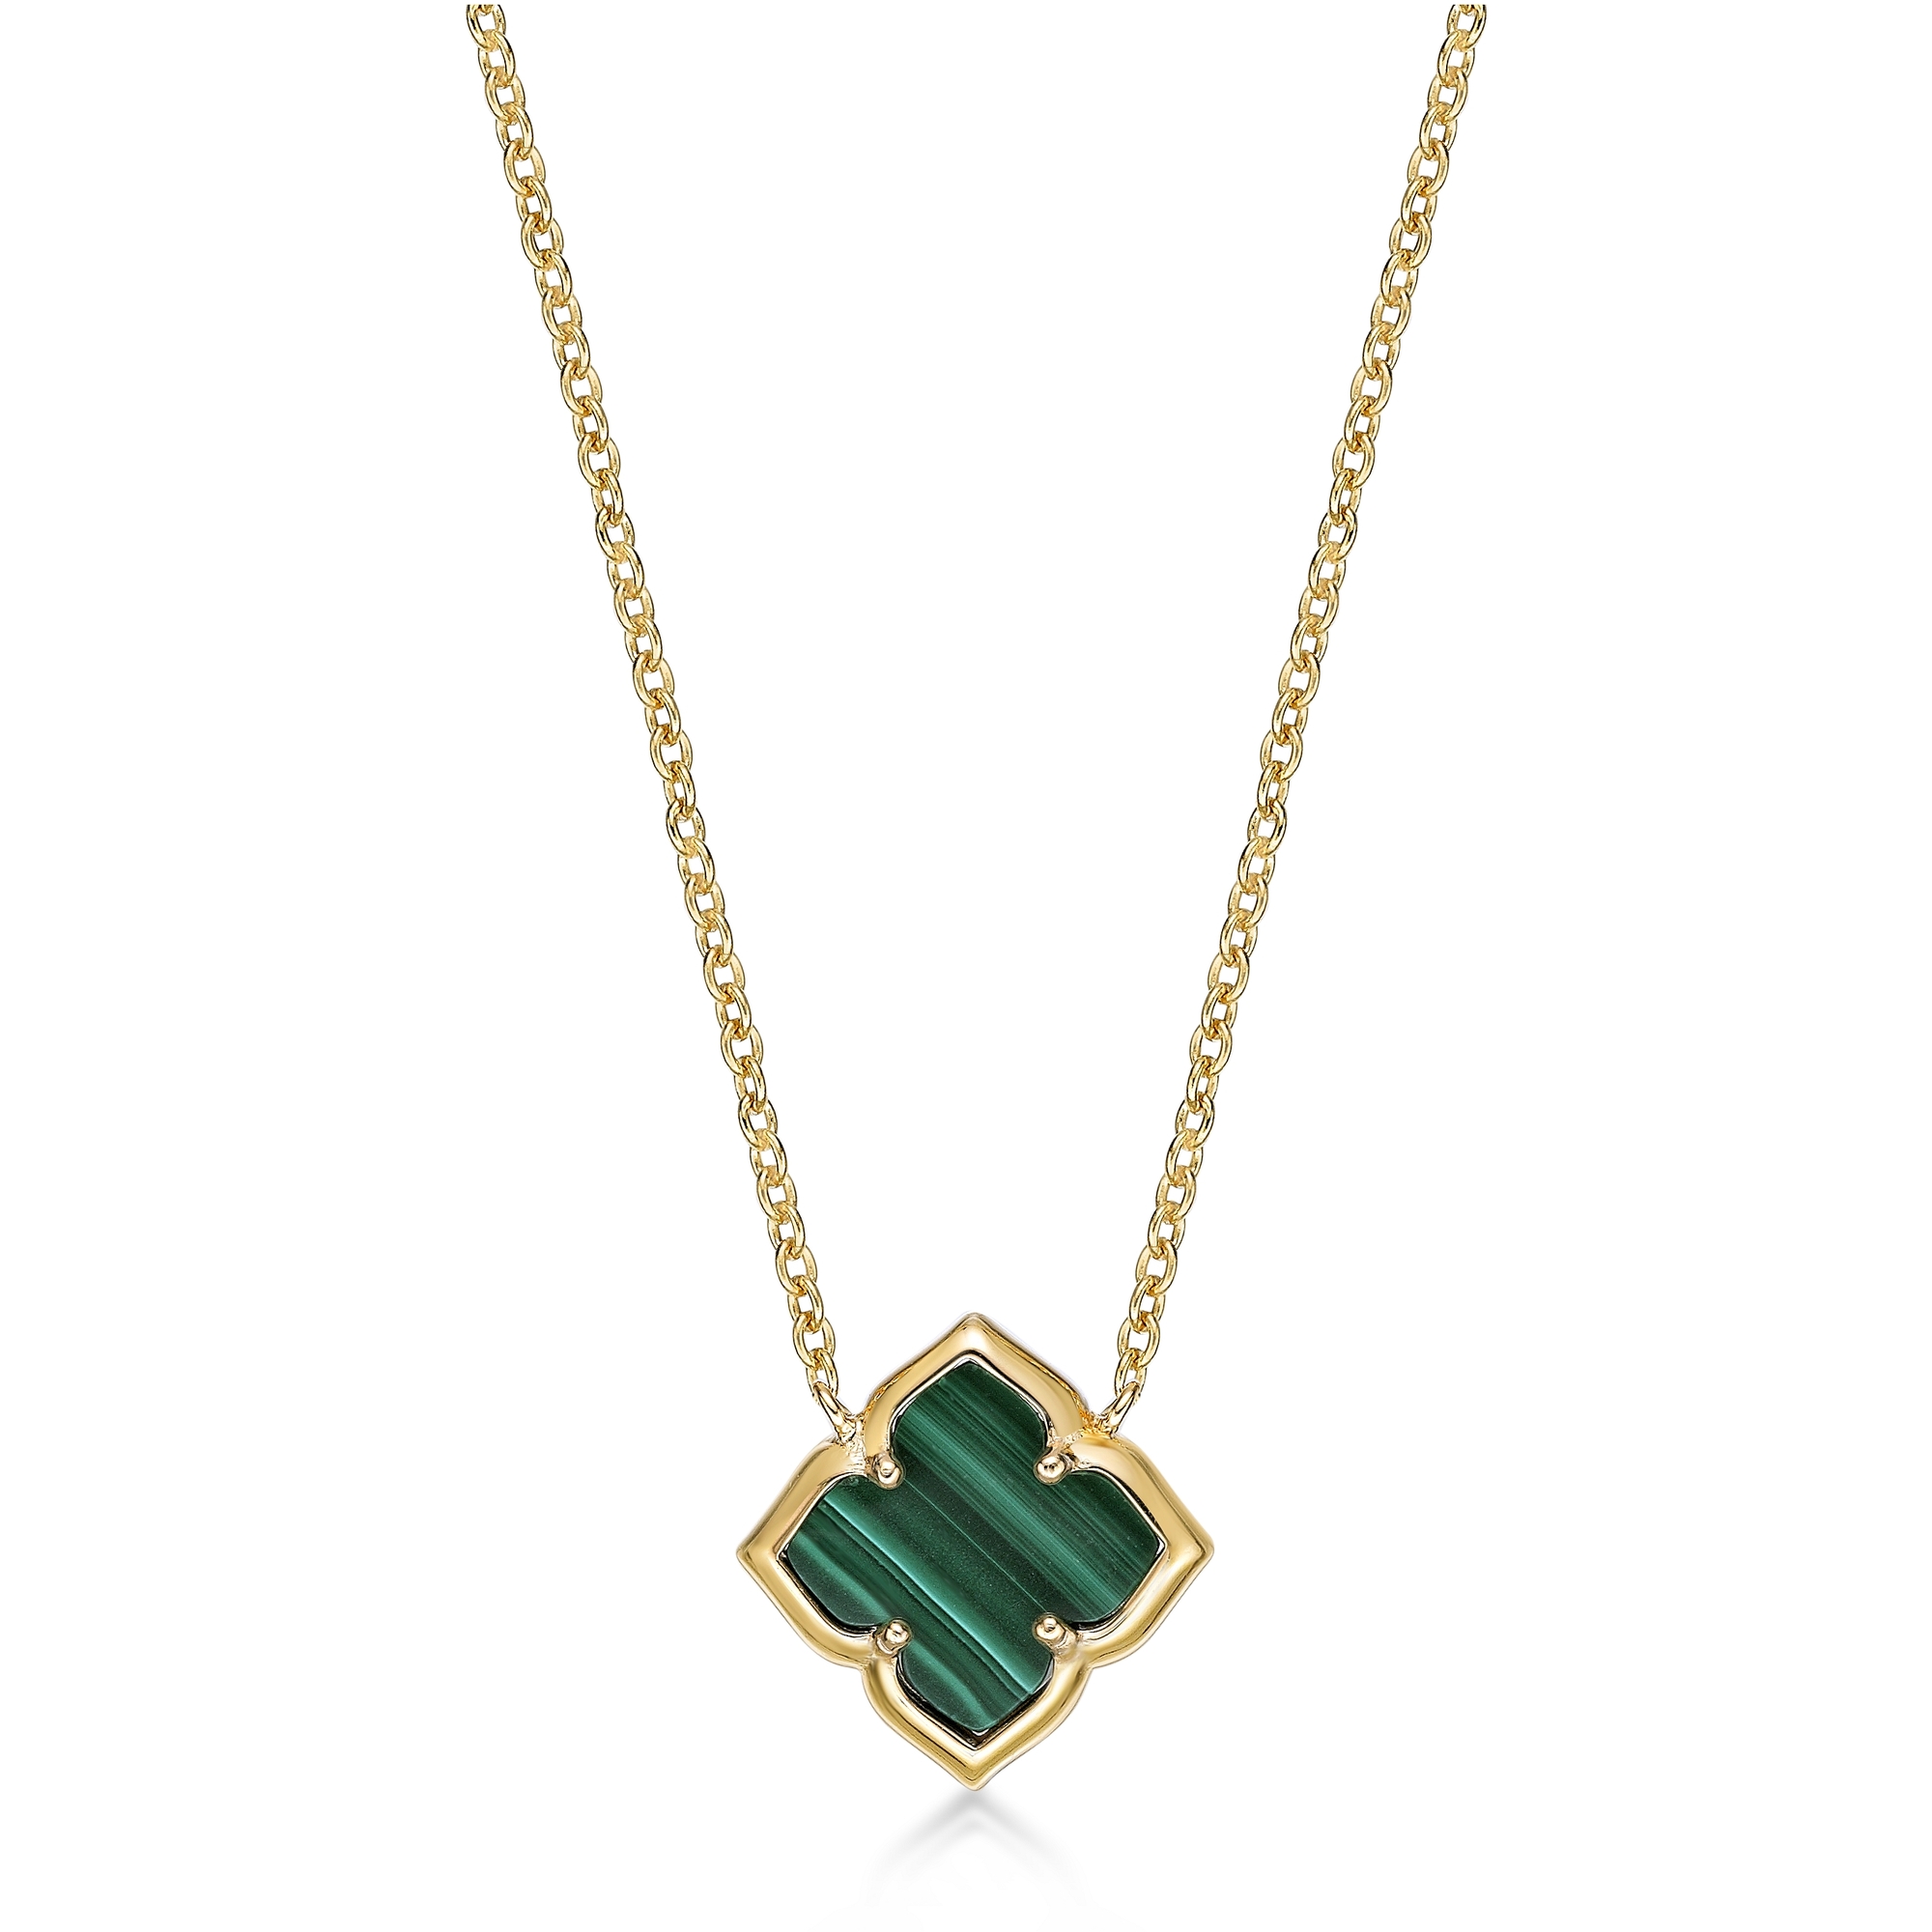 Lavari Jewelers Women’s Malachite Clover Pendant Necklace with Lobster Clasp, 925 Yellow Sterling Silver, 16-18 Inches